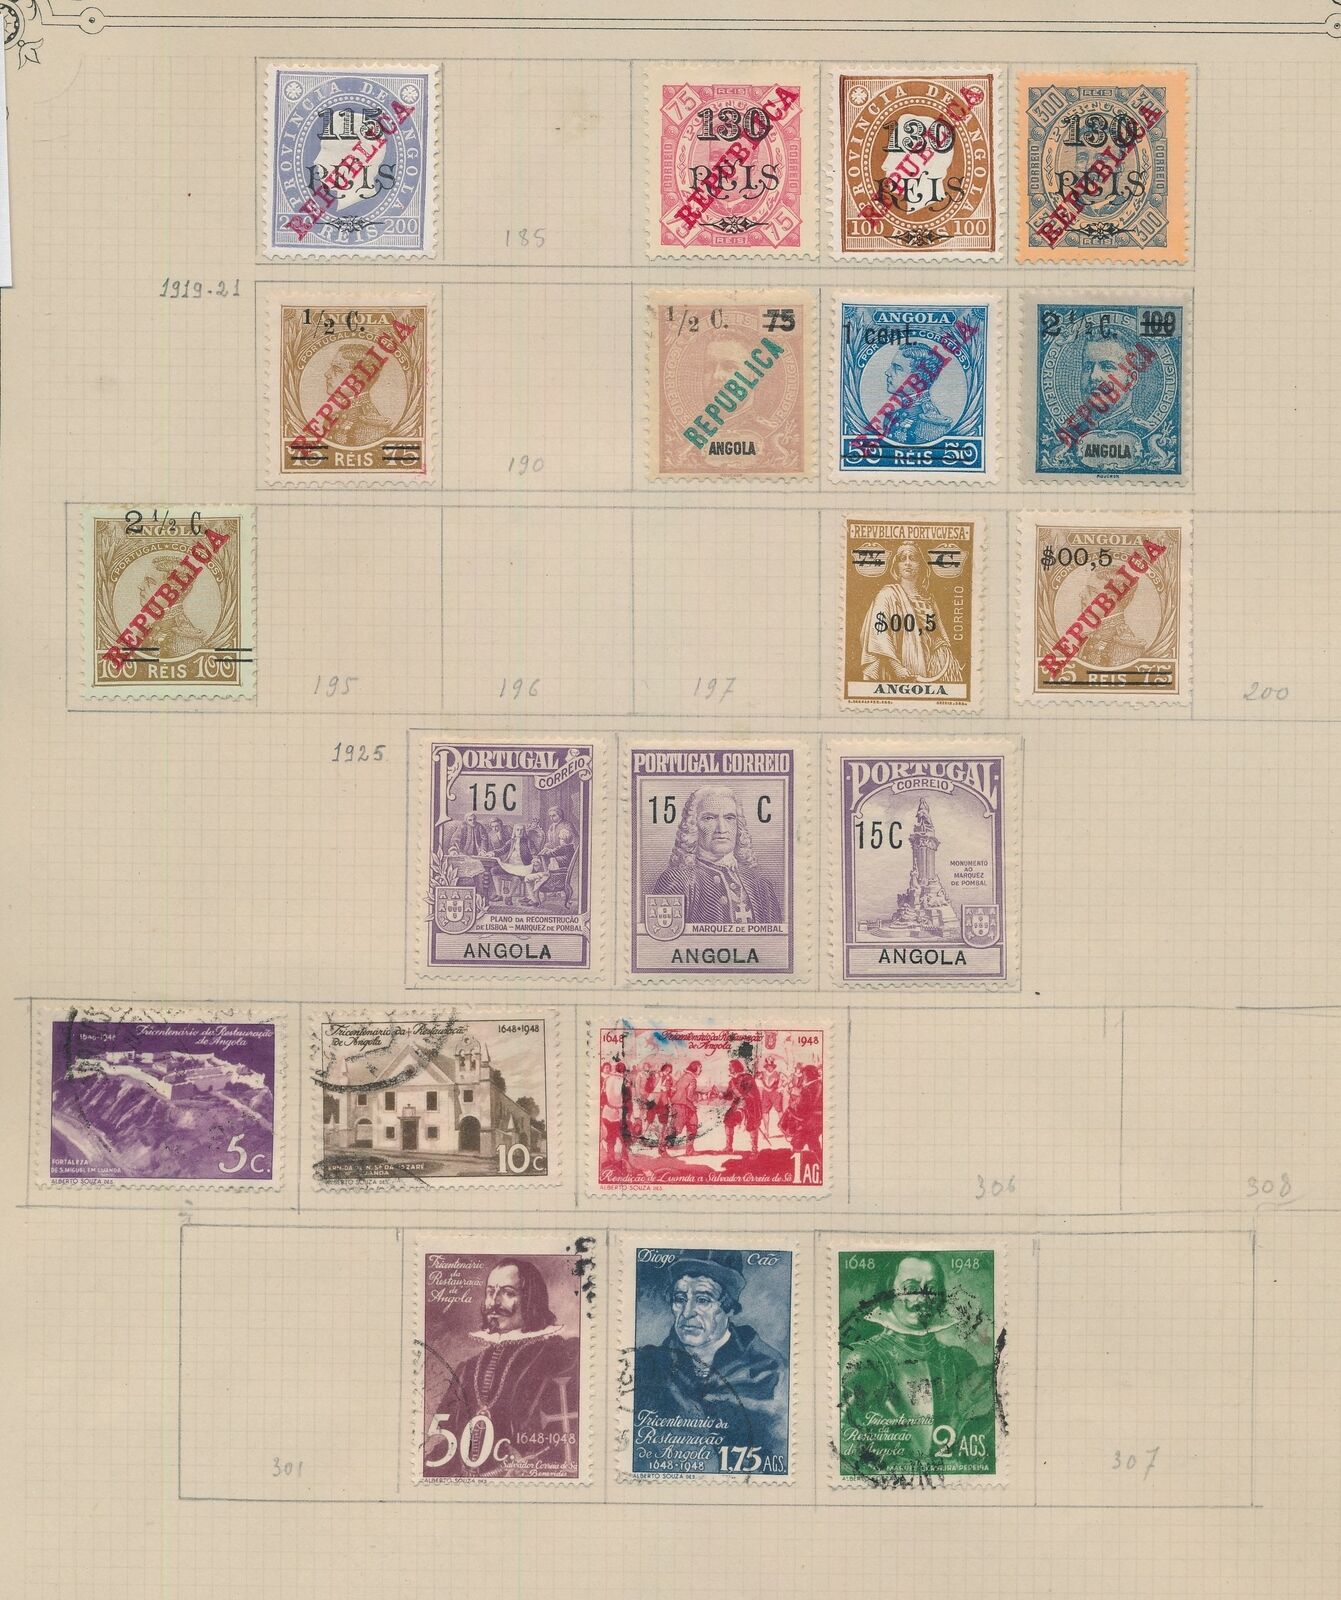 Xc86522 Angola 1919 -1925 Classic Stamps Unchecked Lot